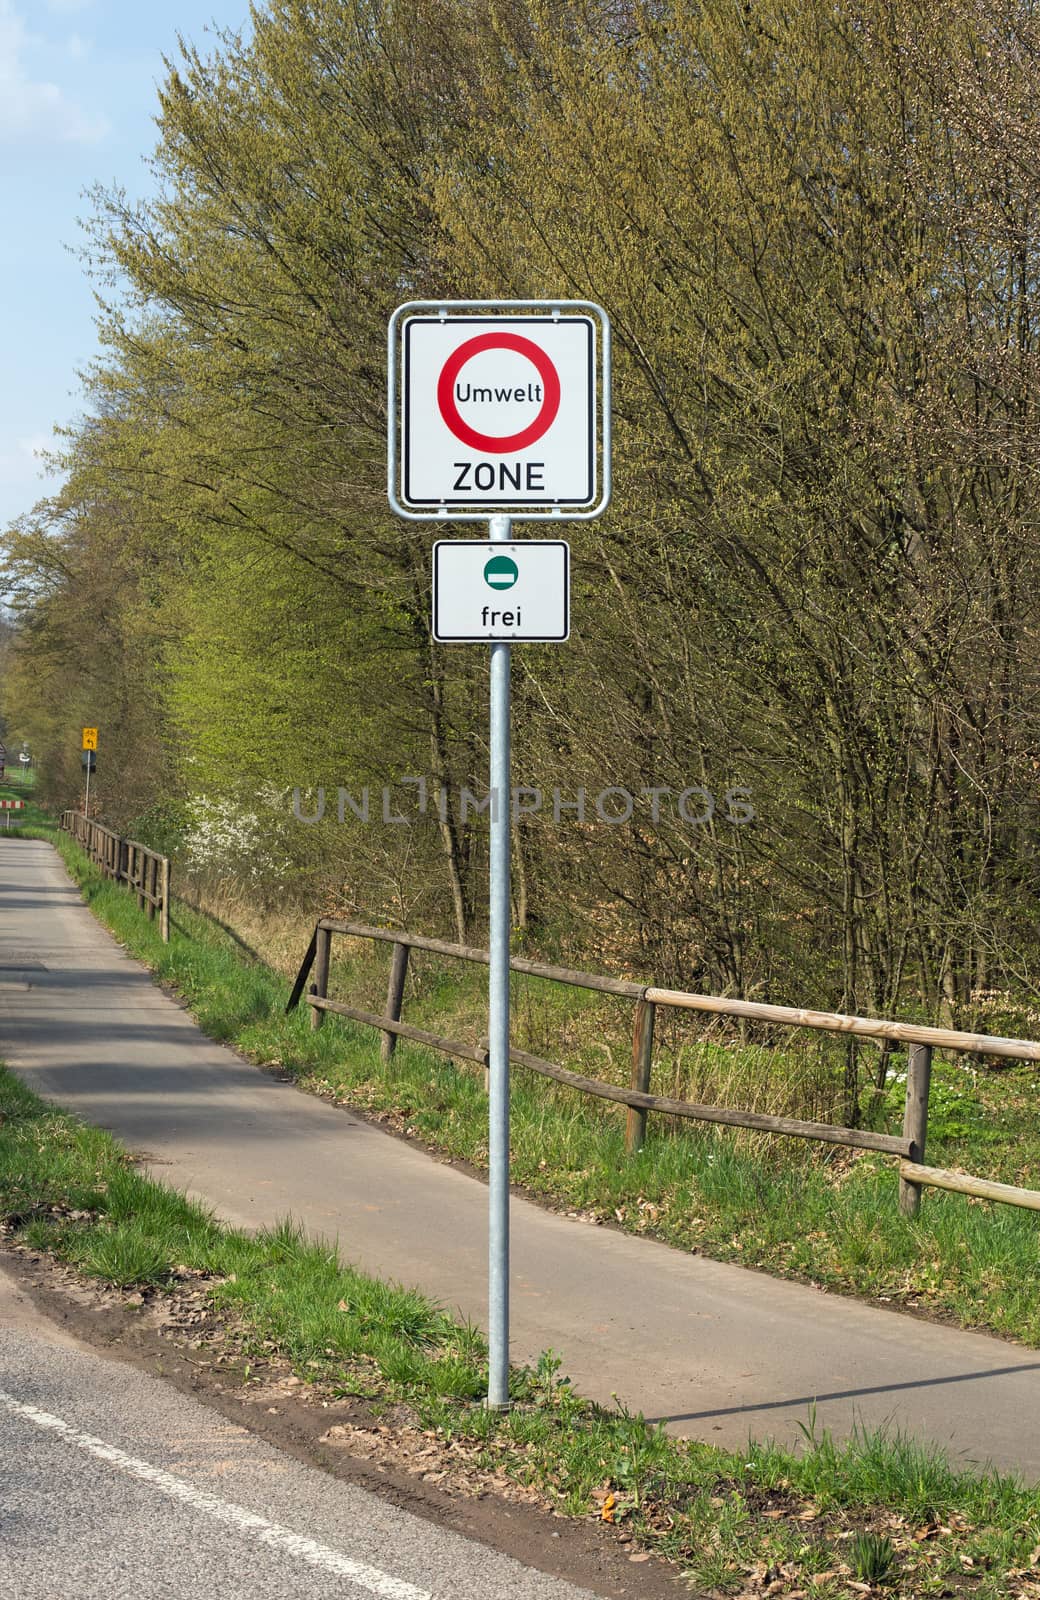 German sign environment zone, green plaque